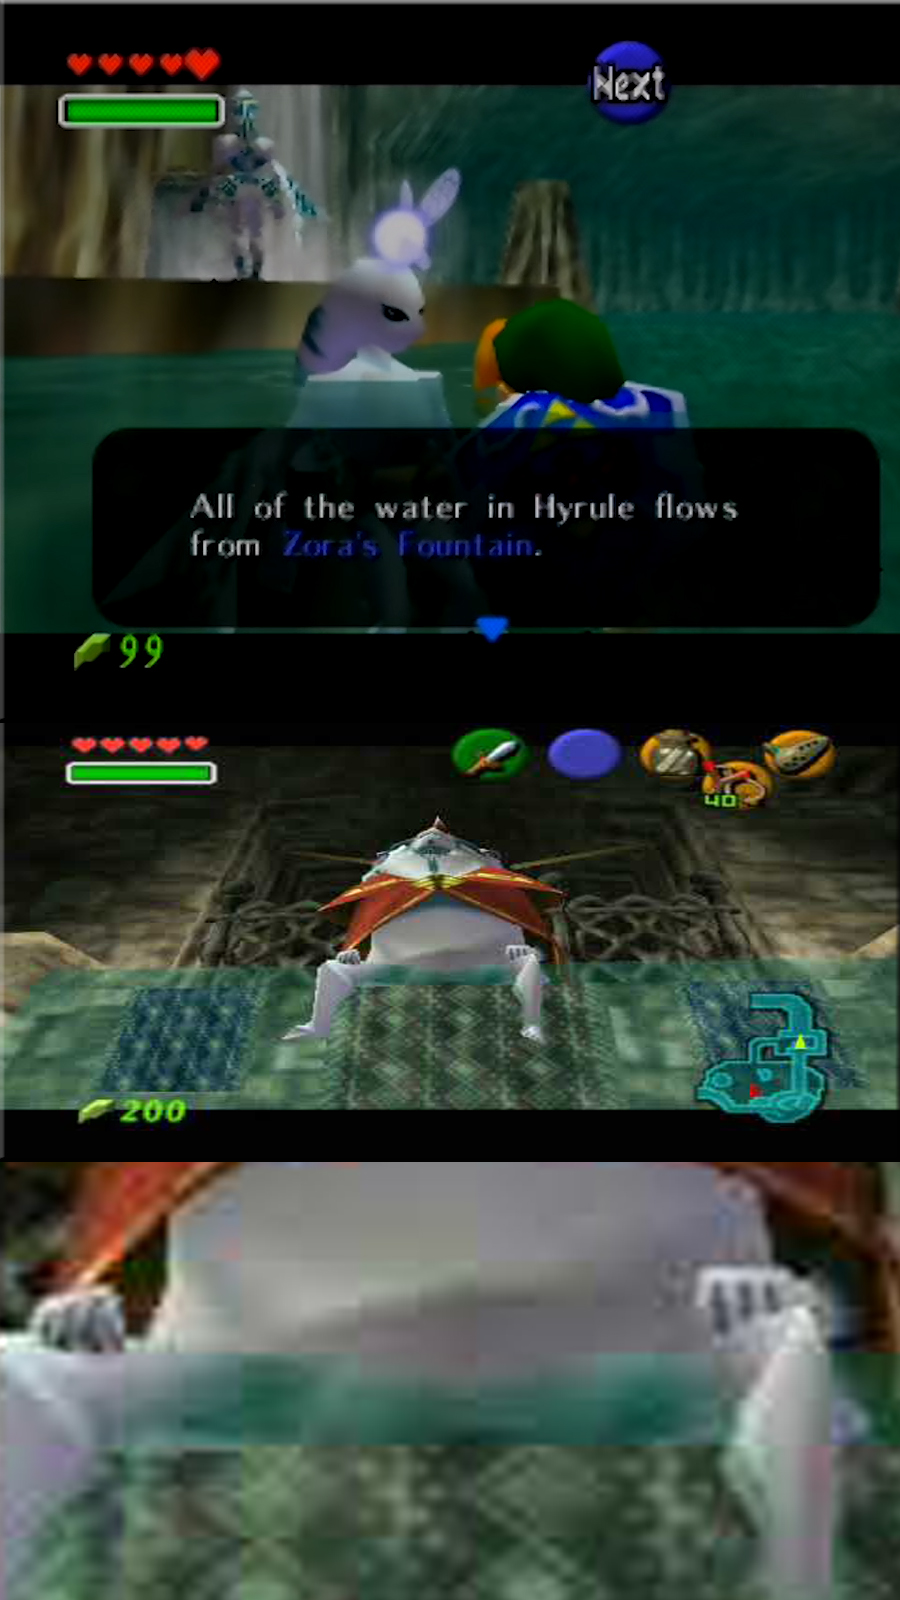 all the water in hyrule - All of the water in Hyrule flows from Zor u nline